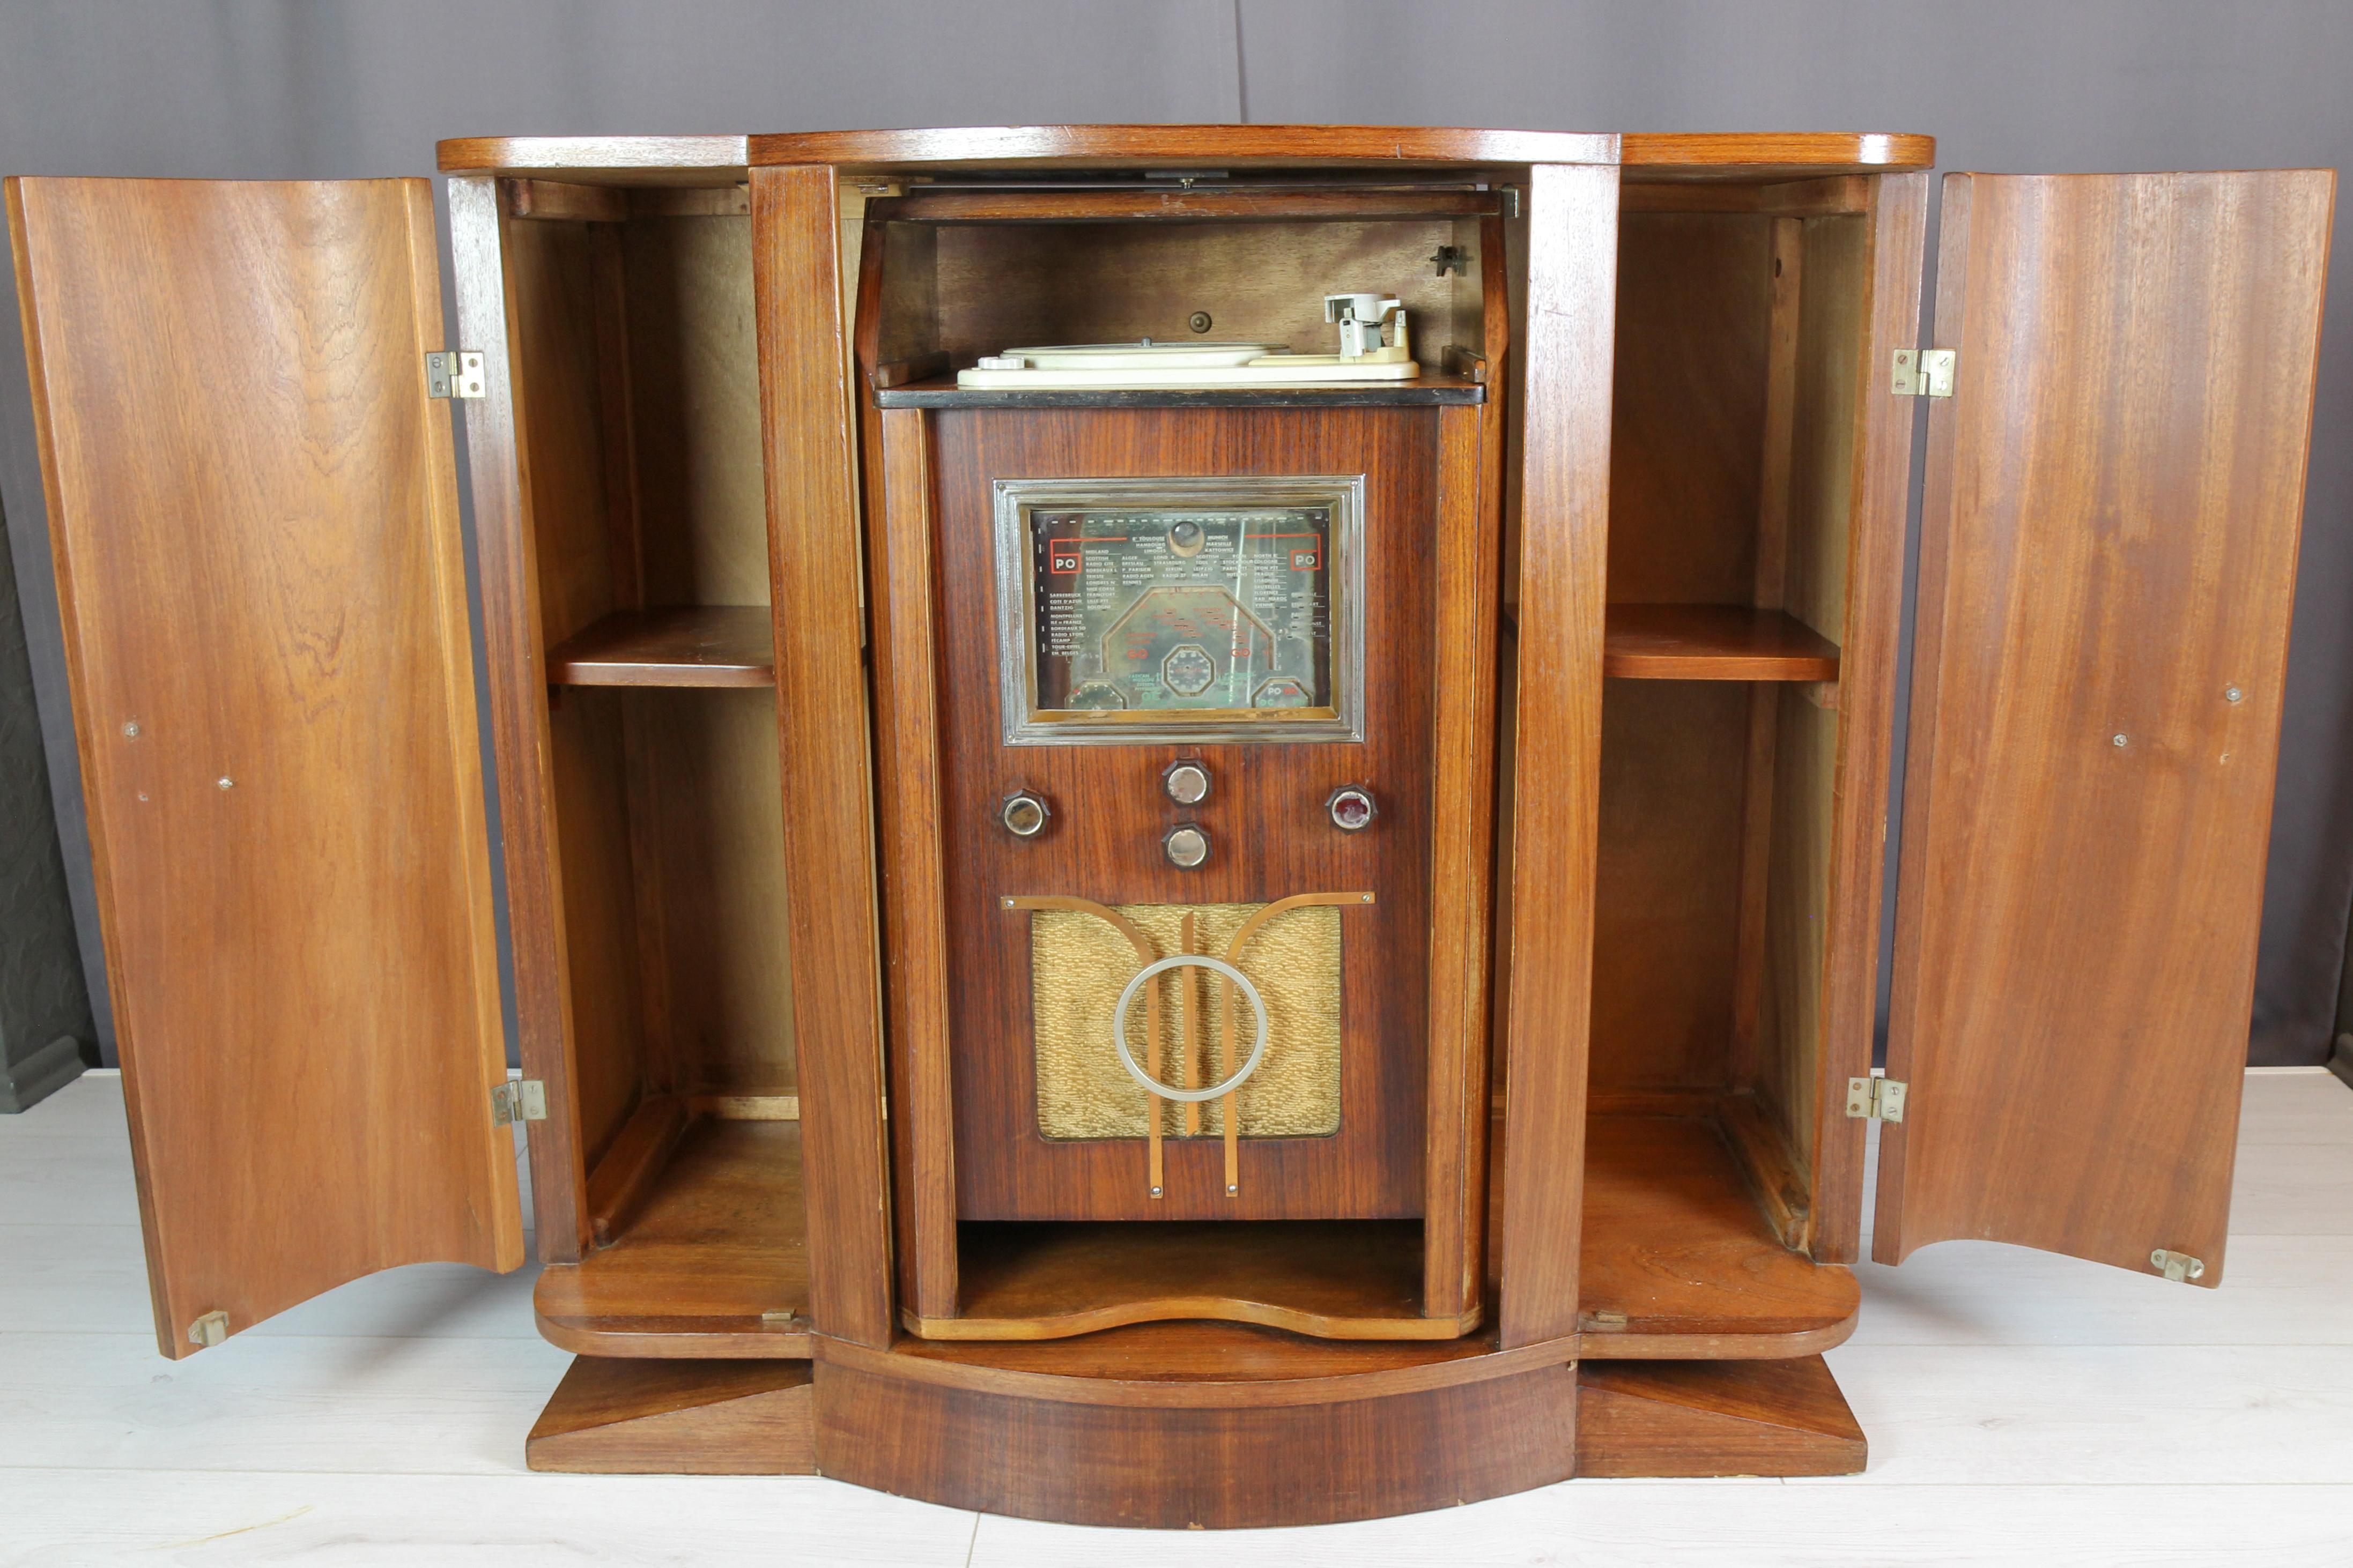 Art Deco Sideboard with Radio and Record Player, France, 1930s.
Beautifully sculpted Art Deco sideboard in blockboard and walnut veneer. The rotatable drawer-look middle section with four brass knobs opens a set consisting of a radio and a record